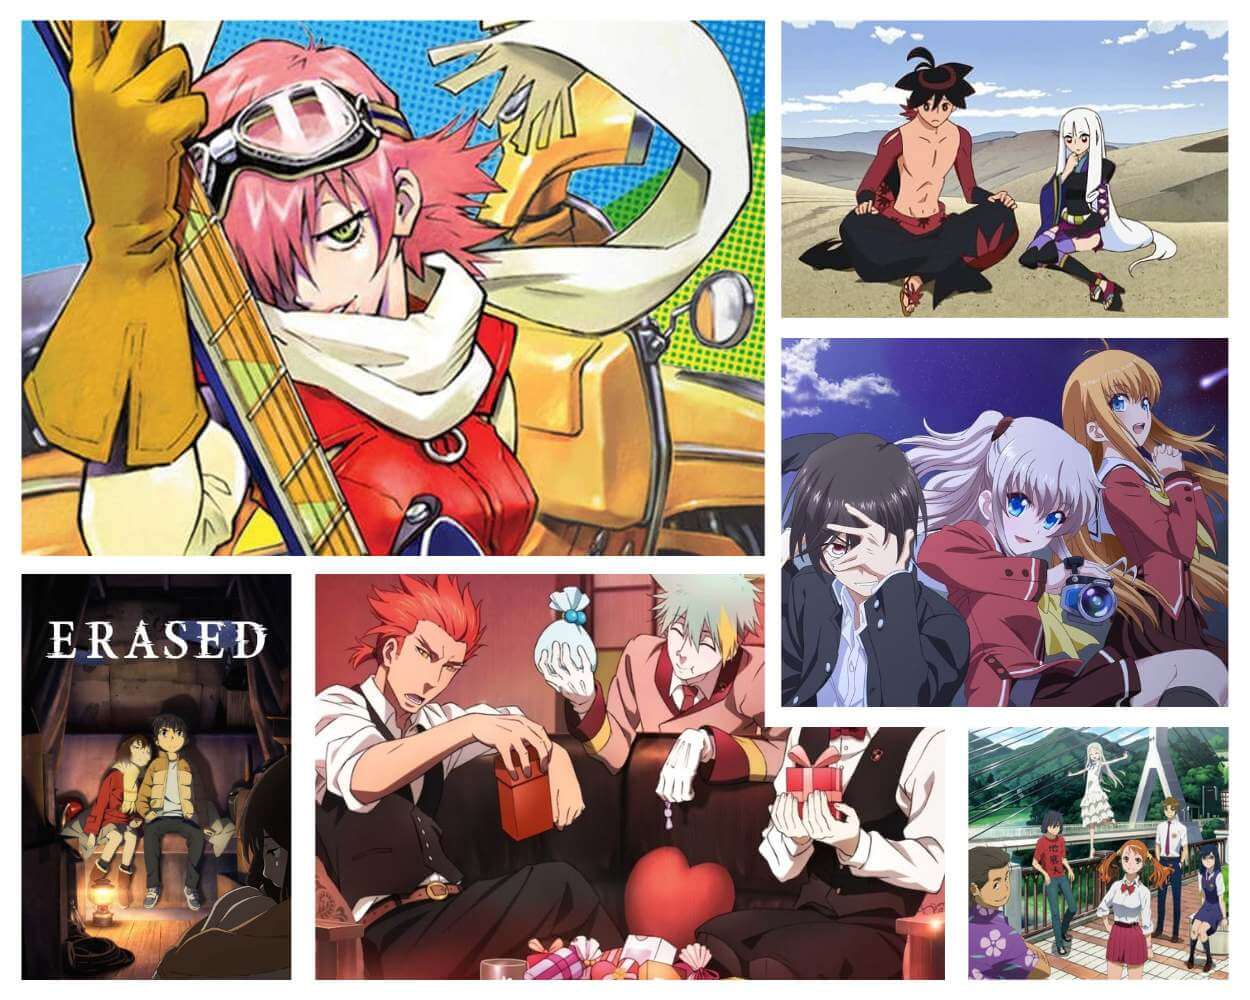 Short Anime Series to Watch This Week